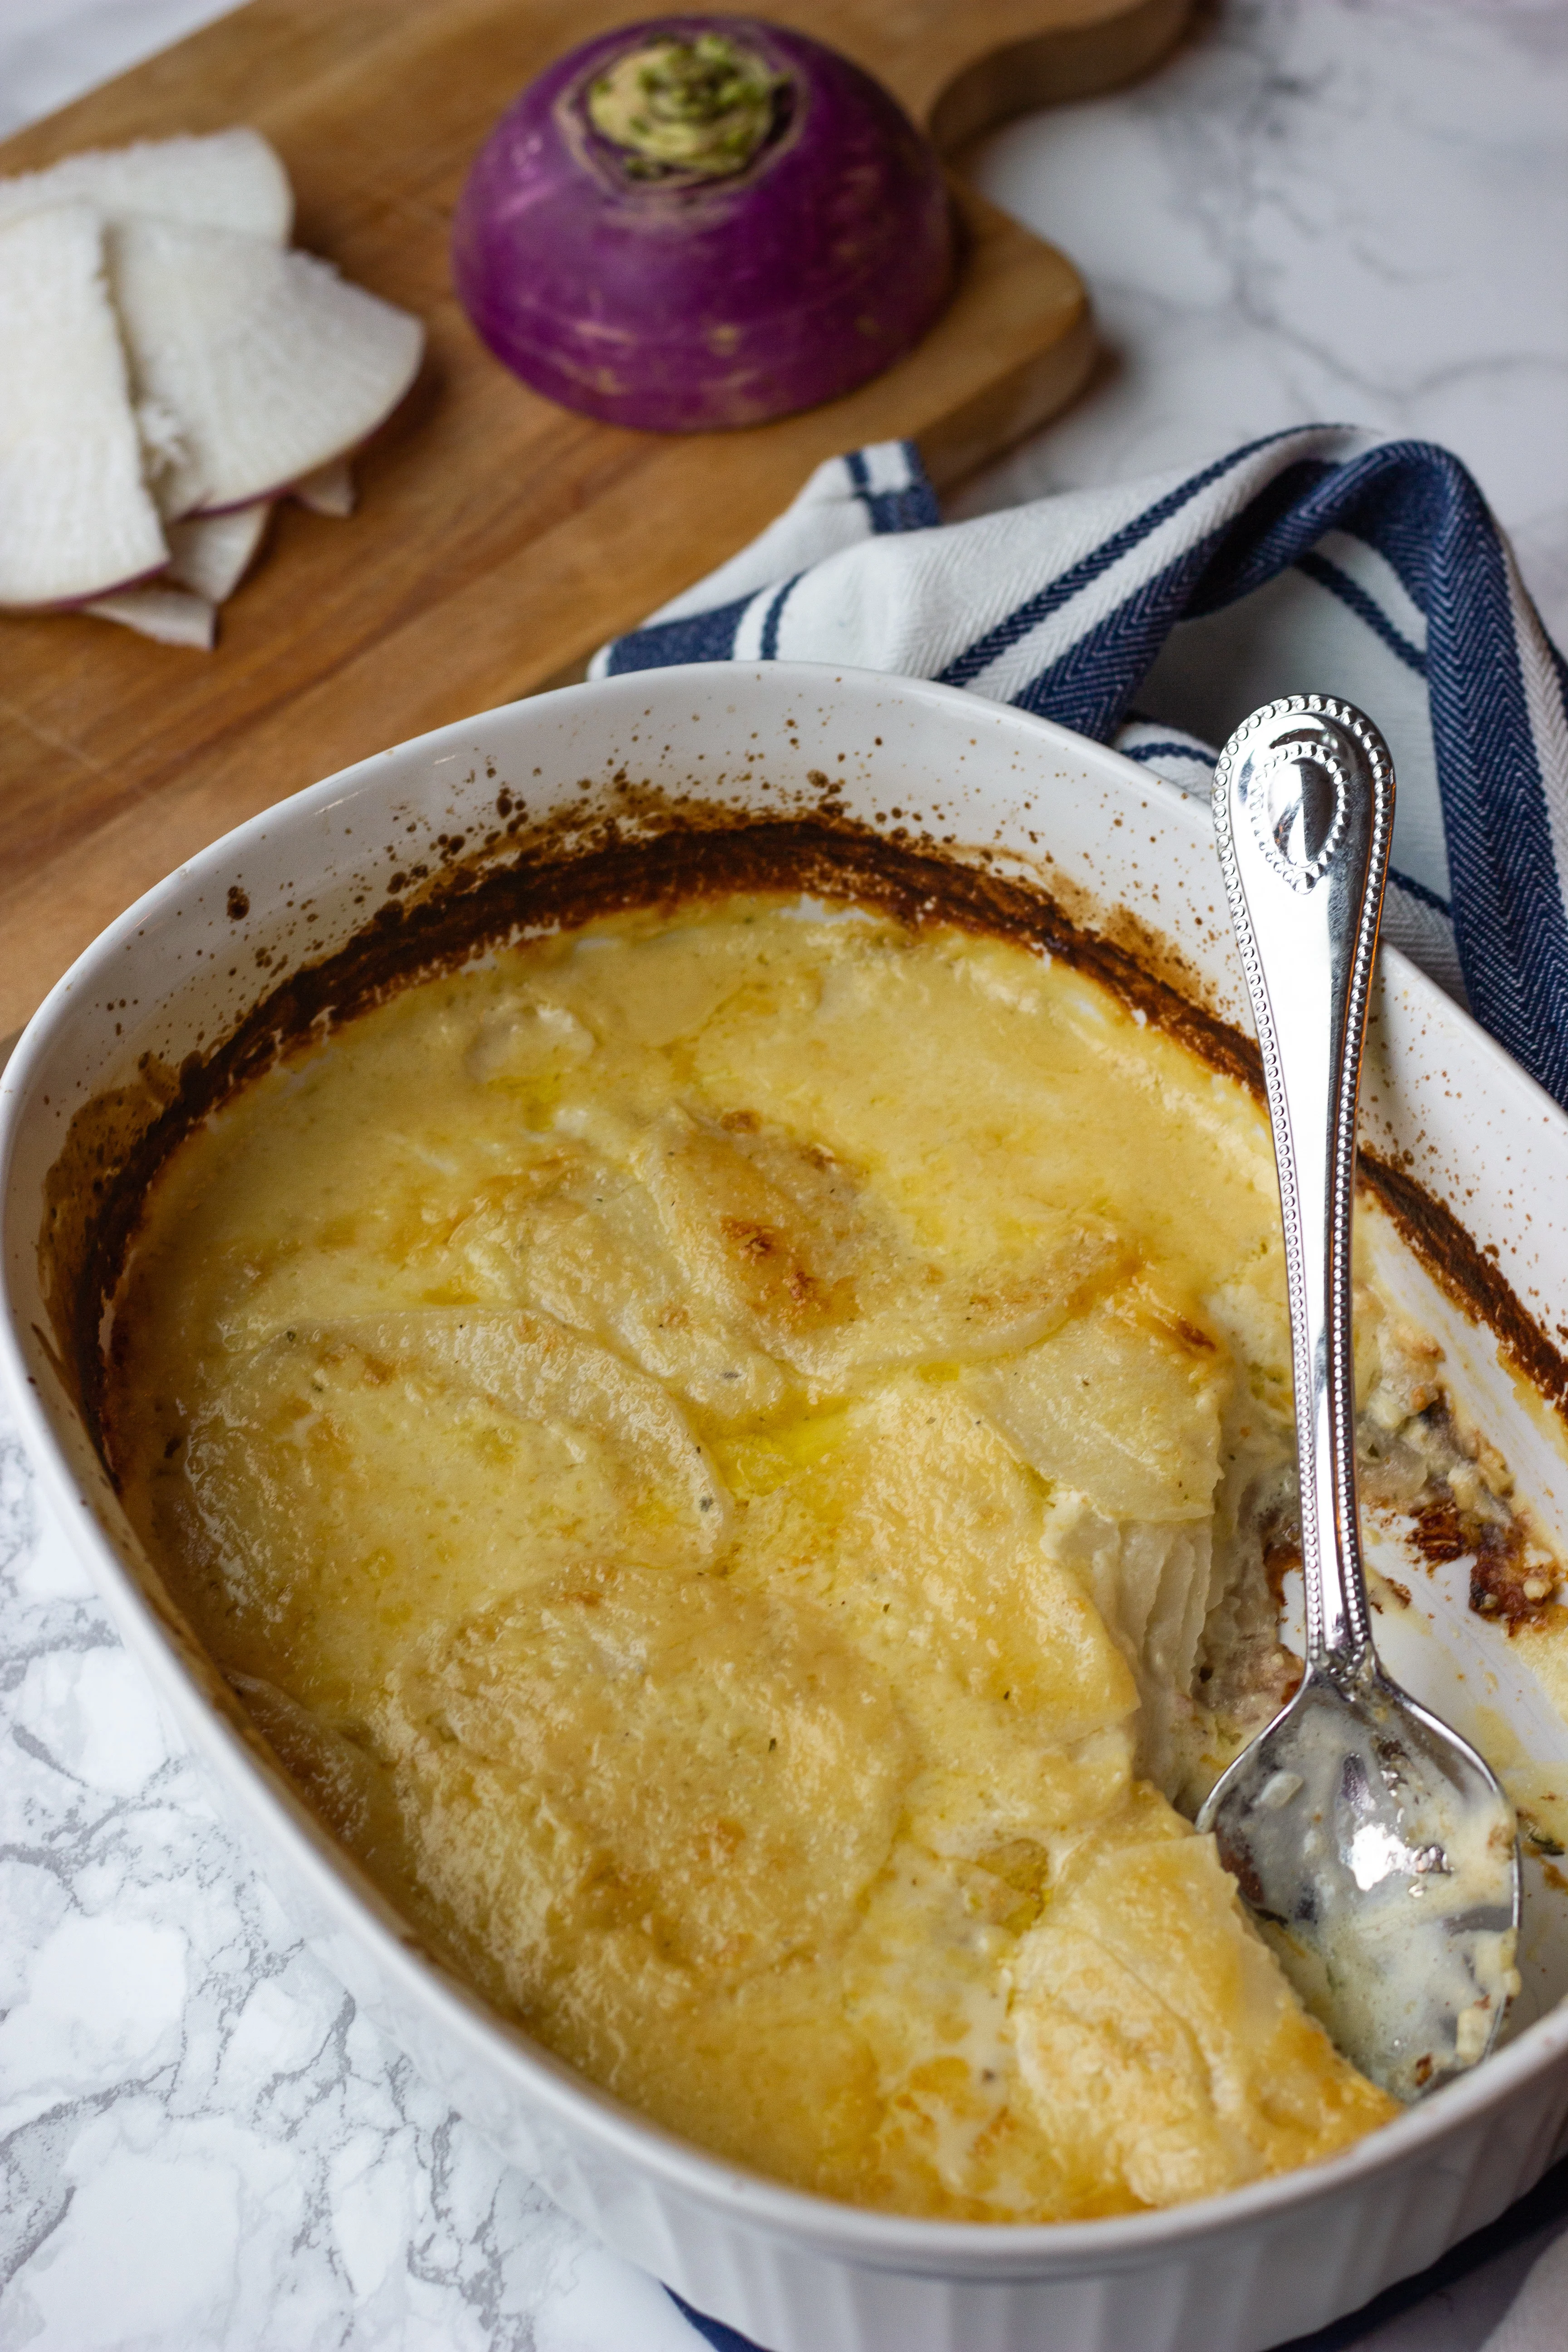 Keto turnip gratin is a keto swap for potatoes. Thin slices of turnips are baked in a rich cheese sauce until tender in this keto side dish. 